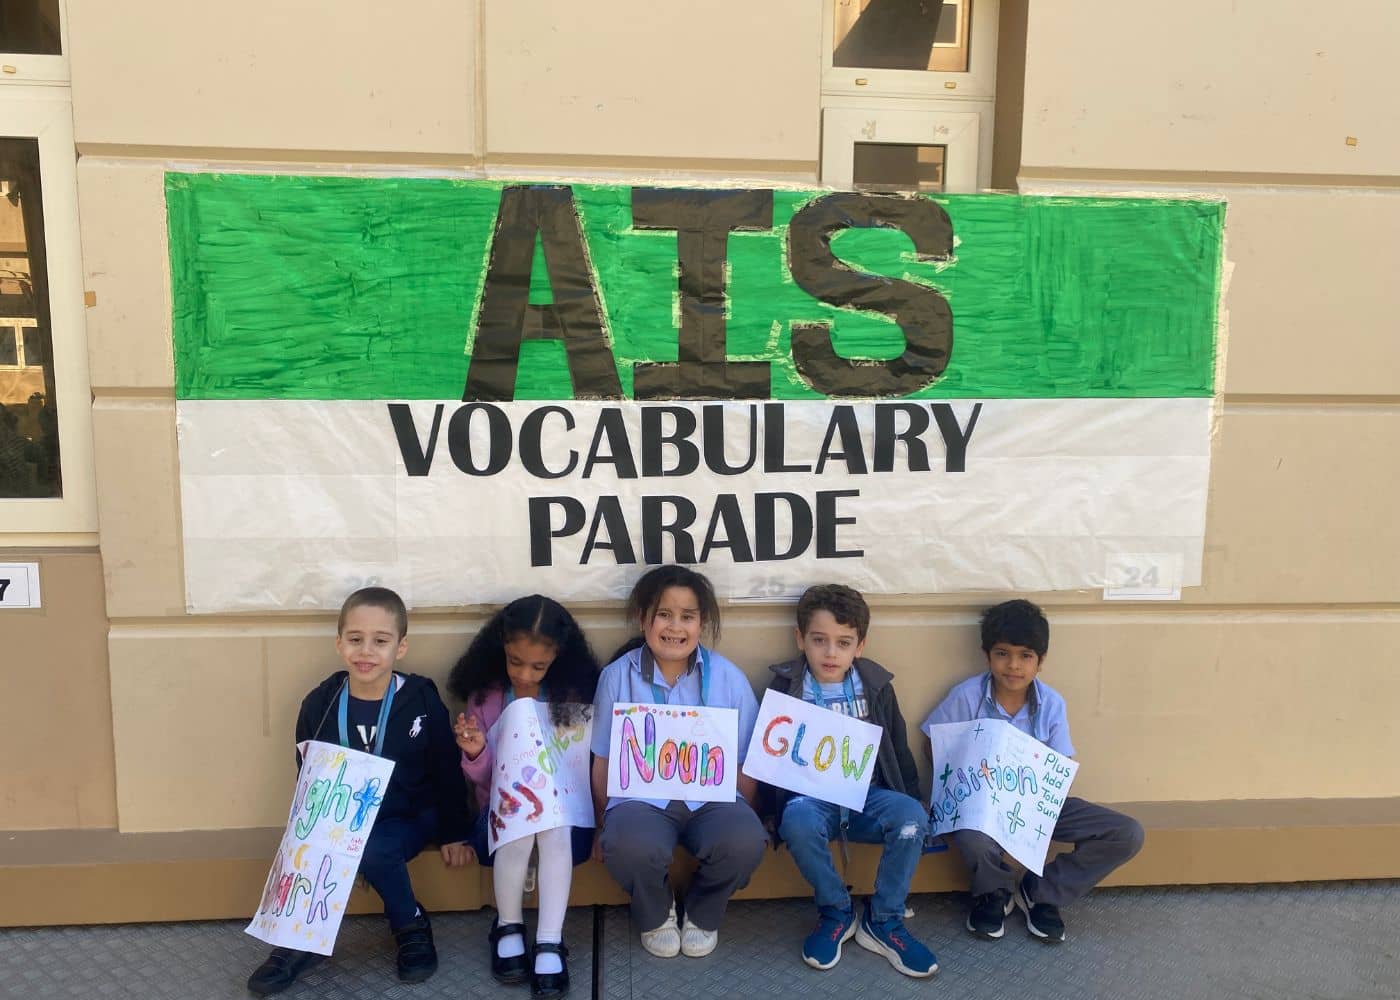 Elementary students of Abu Dhabi International School at the Vocabulary Parade event